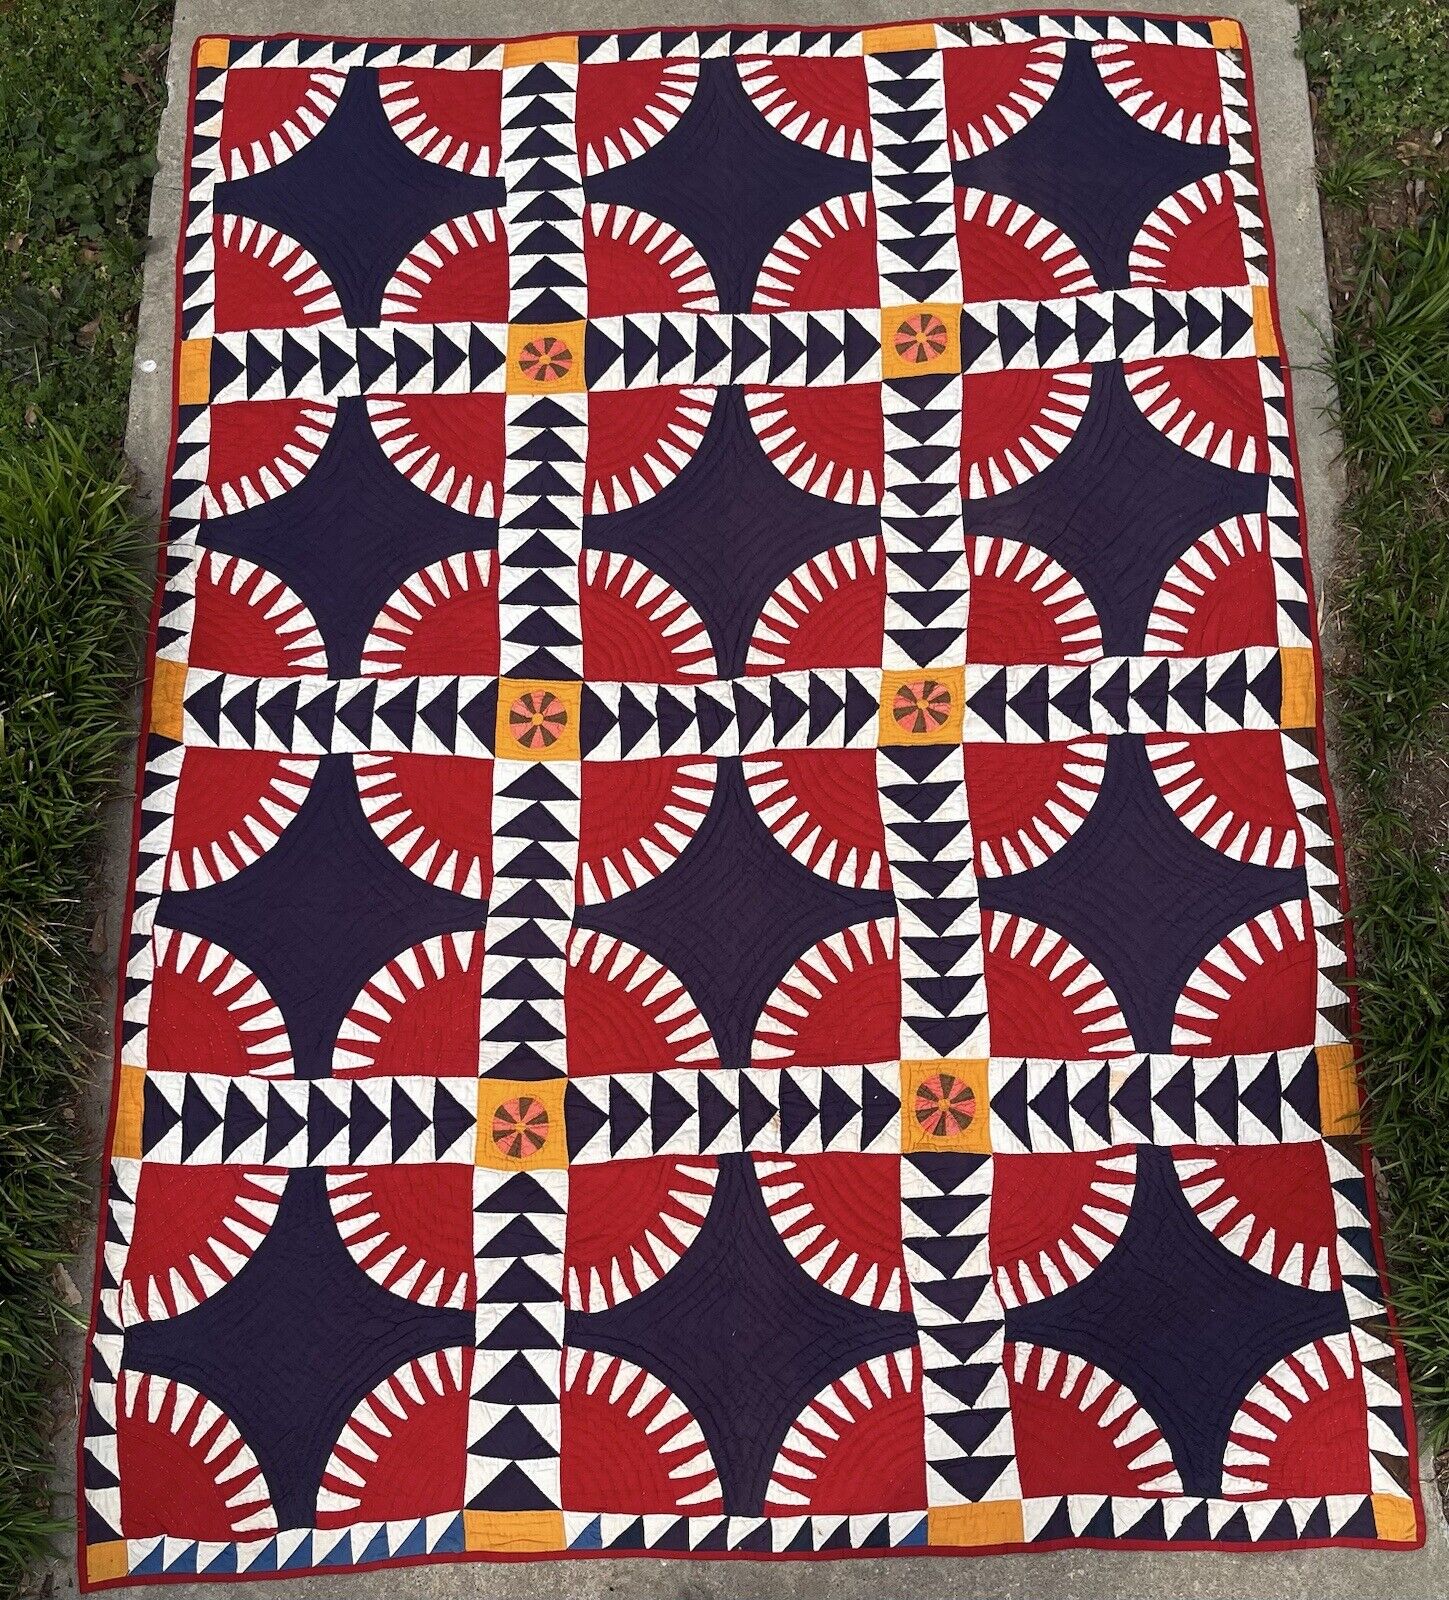 Antique 1880’s New York Beauty Hand Stitched American Folk Art Quilt